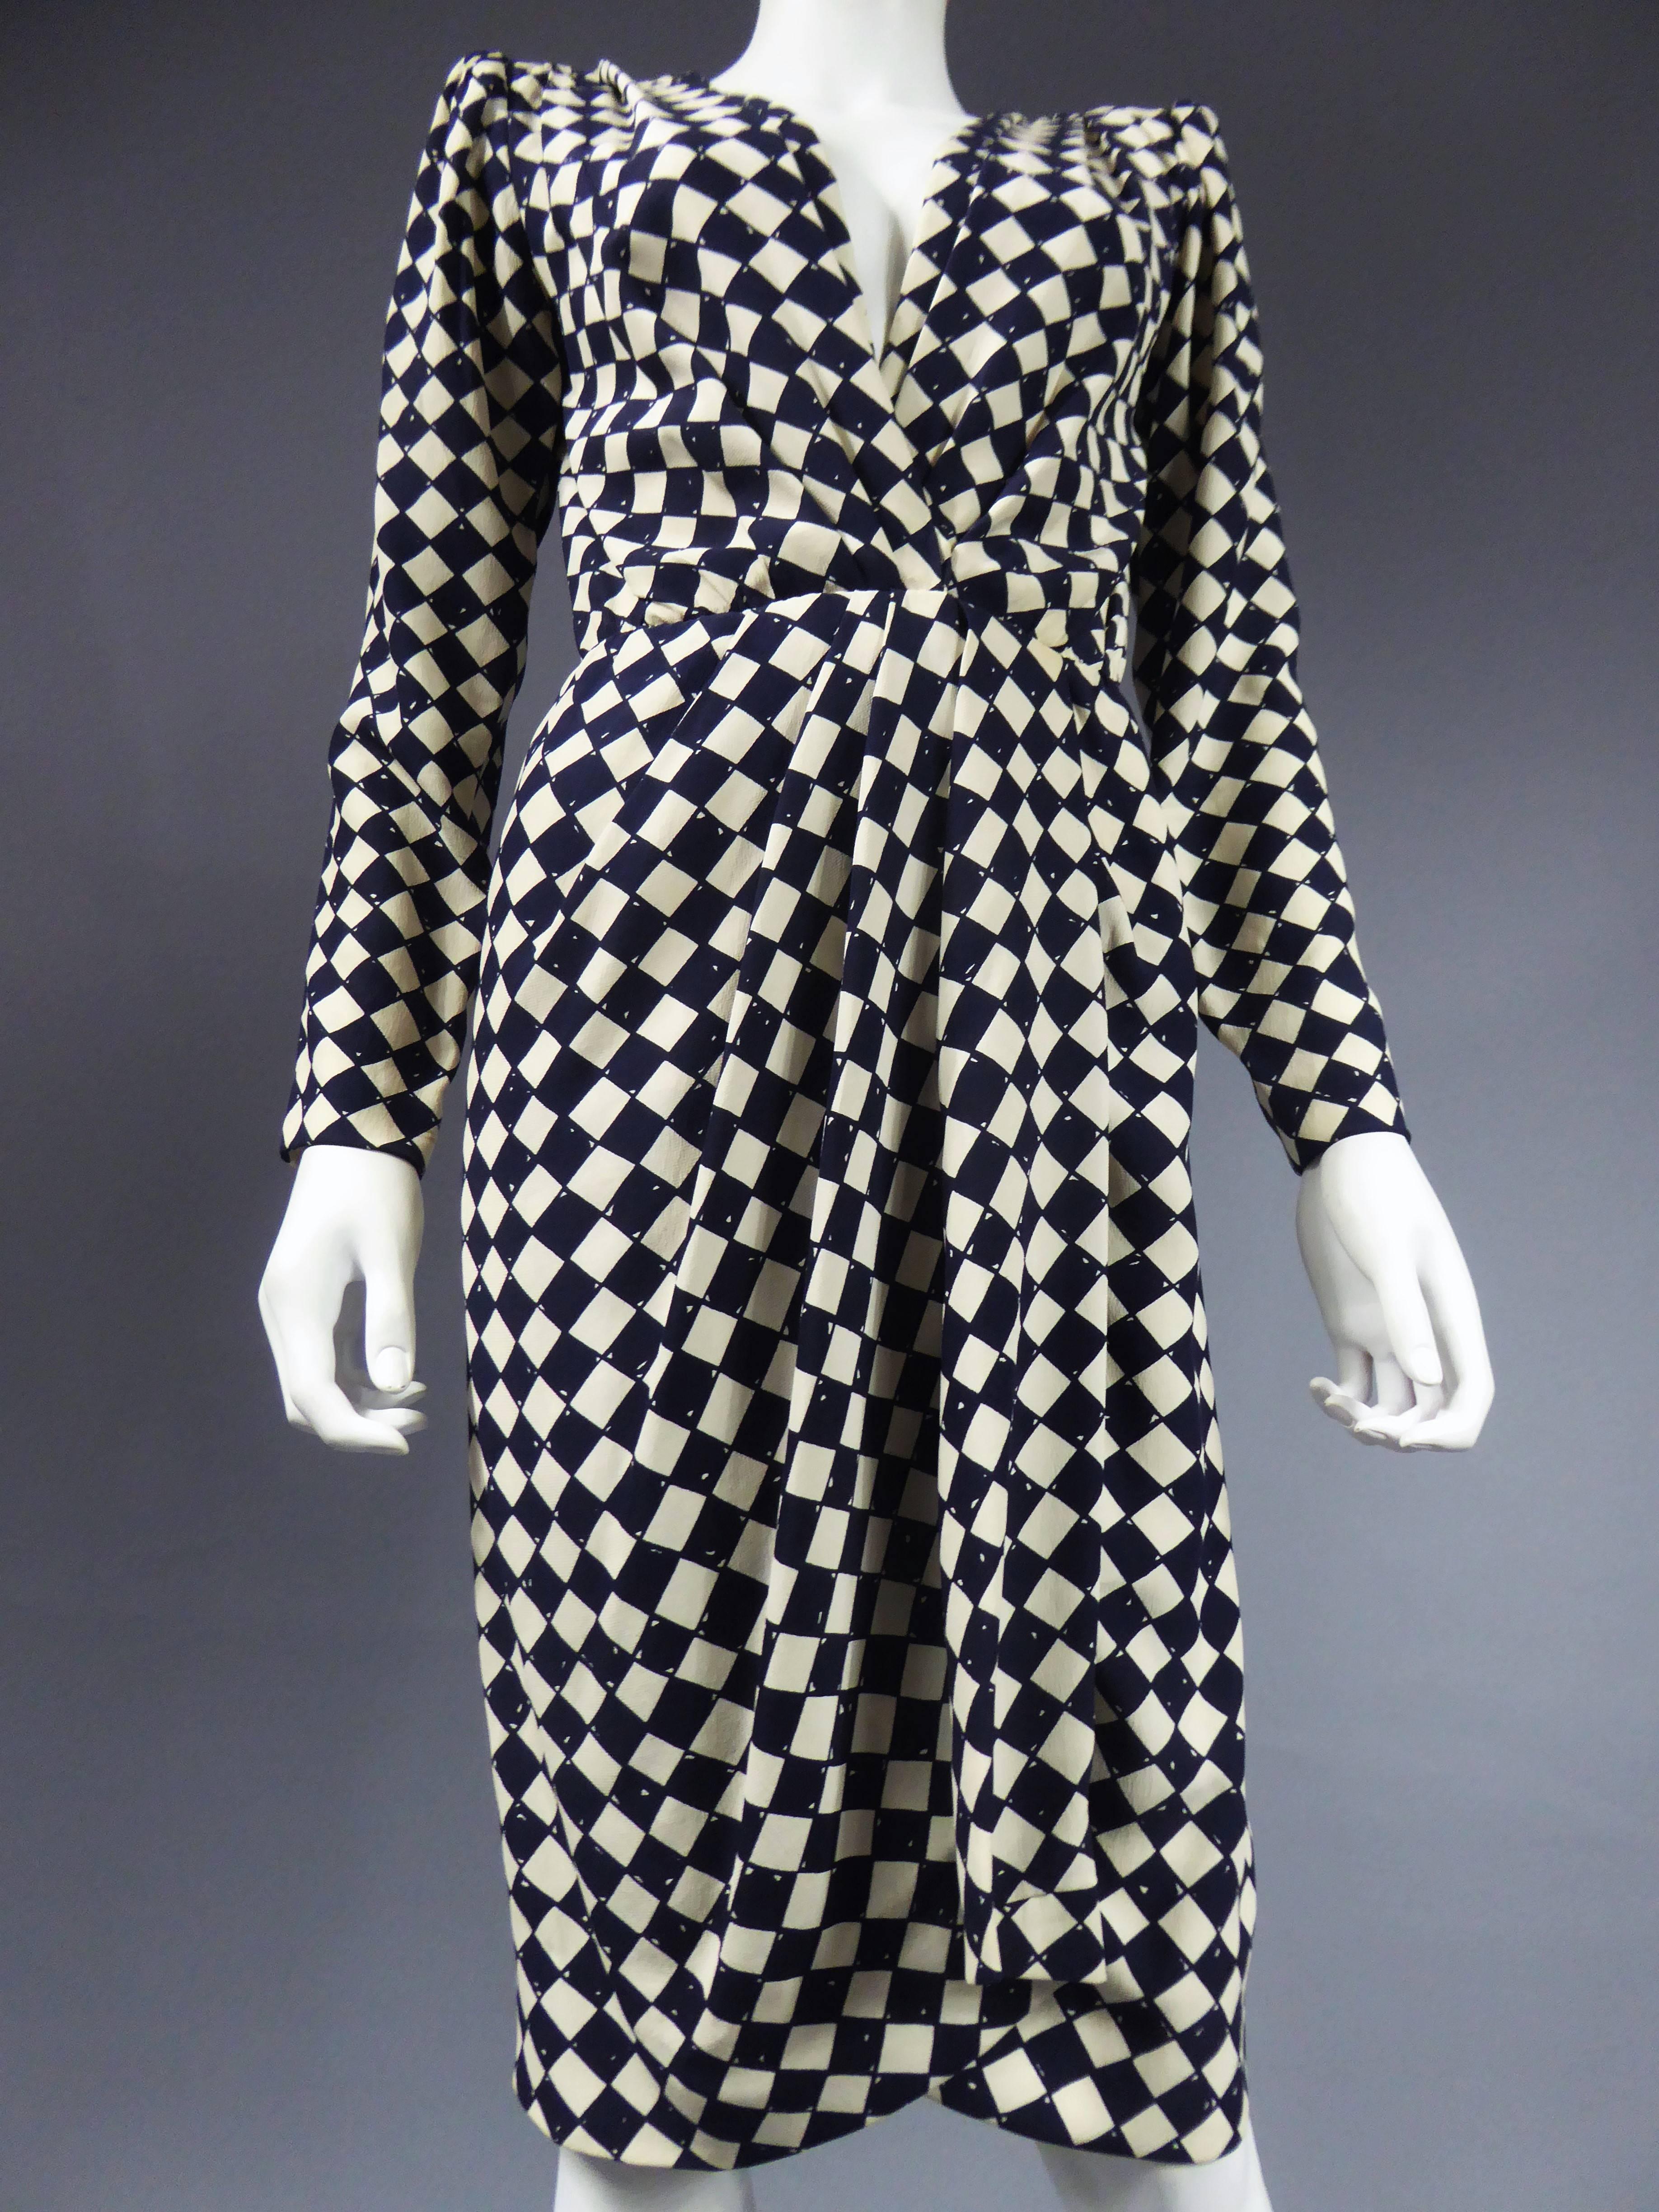 Circa 1980
France
Hubert de Givenchy dress Haute Couture Numbered 77304. Silk crepe with graphic harlequin print in black and white. Long sleeves and midi wrap skirt. Large integrated shoulder pads. Integrated zipper under the wallet of the skirt,